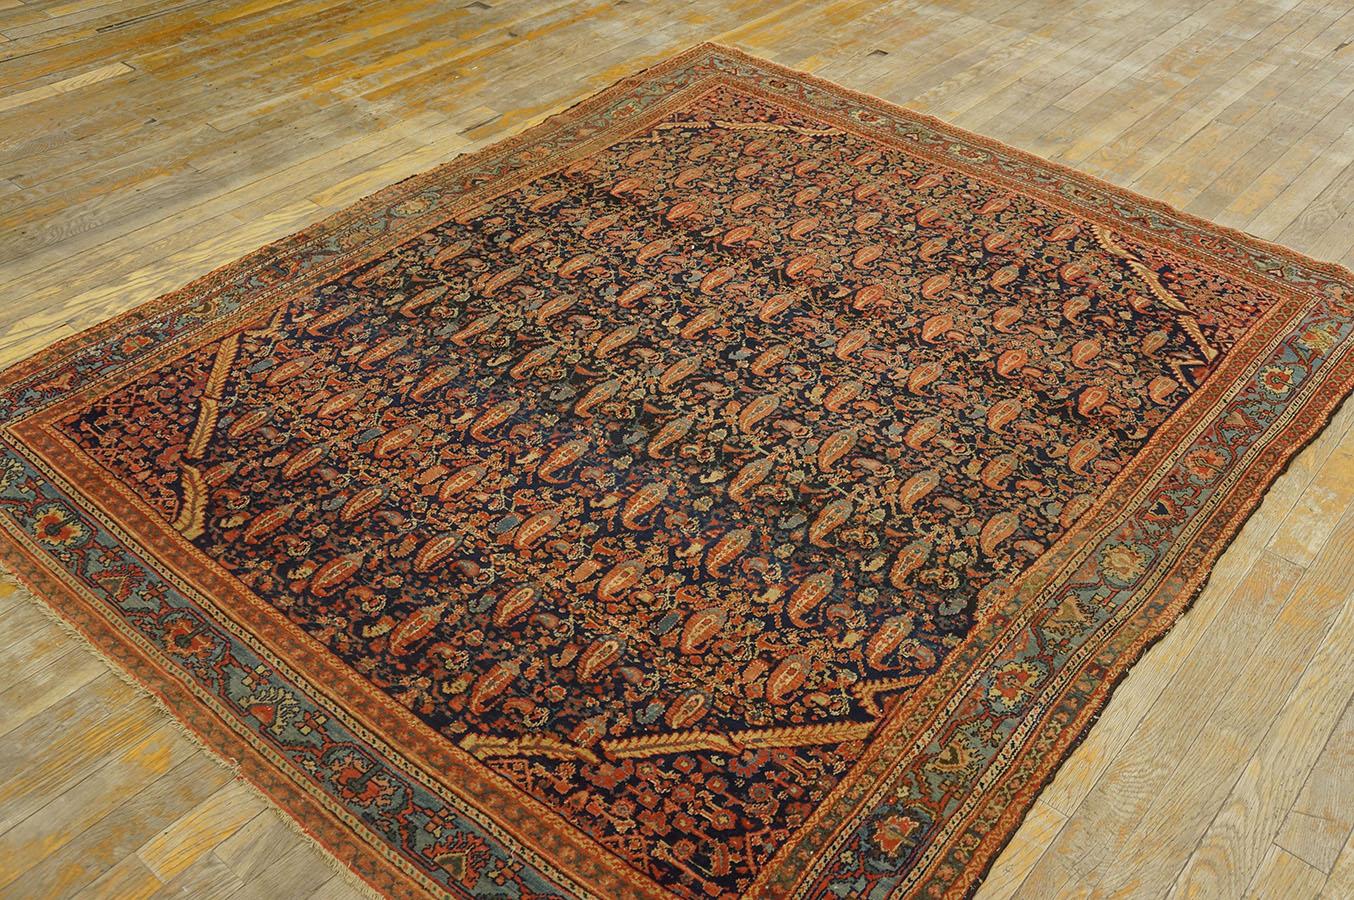 Late 19th Century Persian Malayer Carpet ( 5' x 6' 2'' - 152 x 188 cm ) For Sale 3